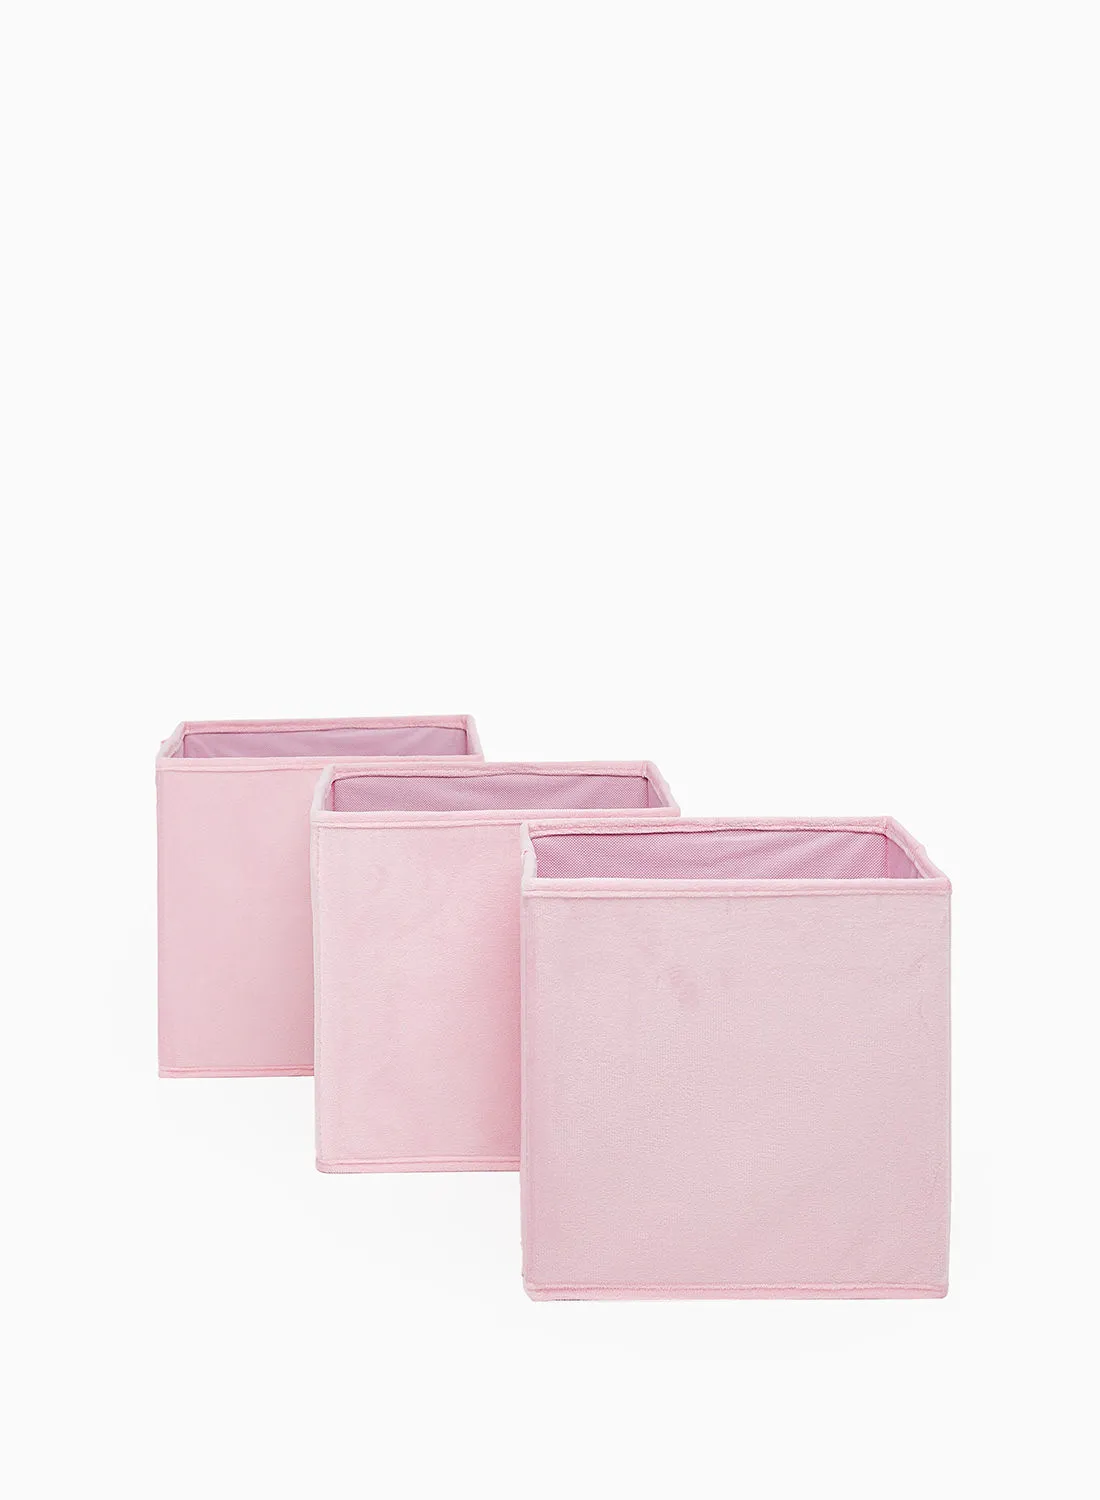 Amal 3 Pack Foldable Cube Storage Bin For Clothes Storage In Closet, Easy Collapsible, Sturdy Fabric, Home Or Office Use, Easy To Carry And Space Saver pink 25X25X25cm